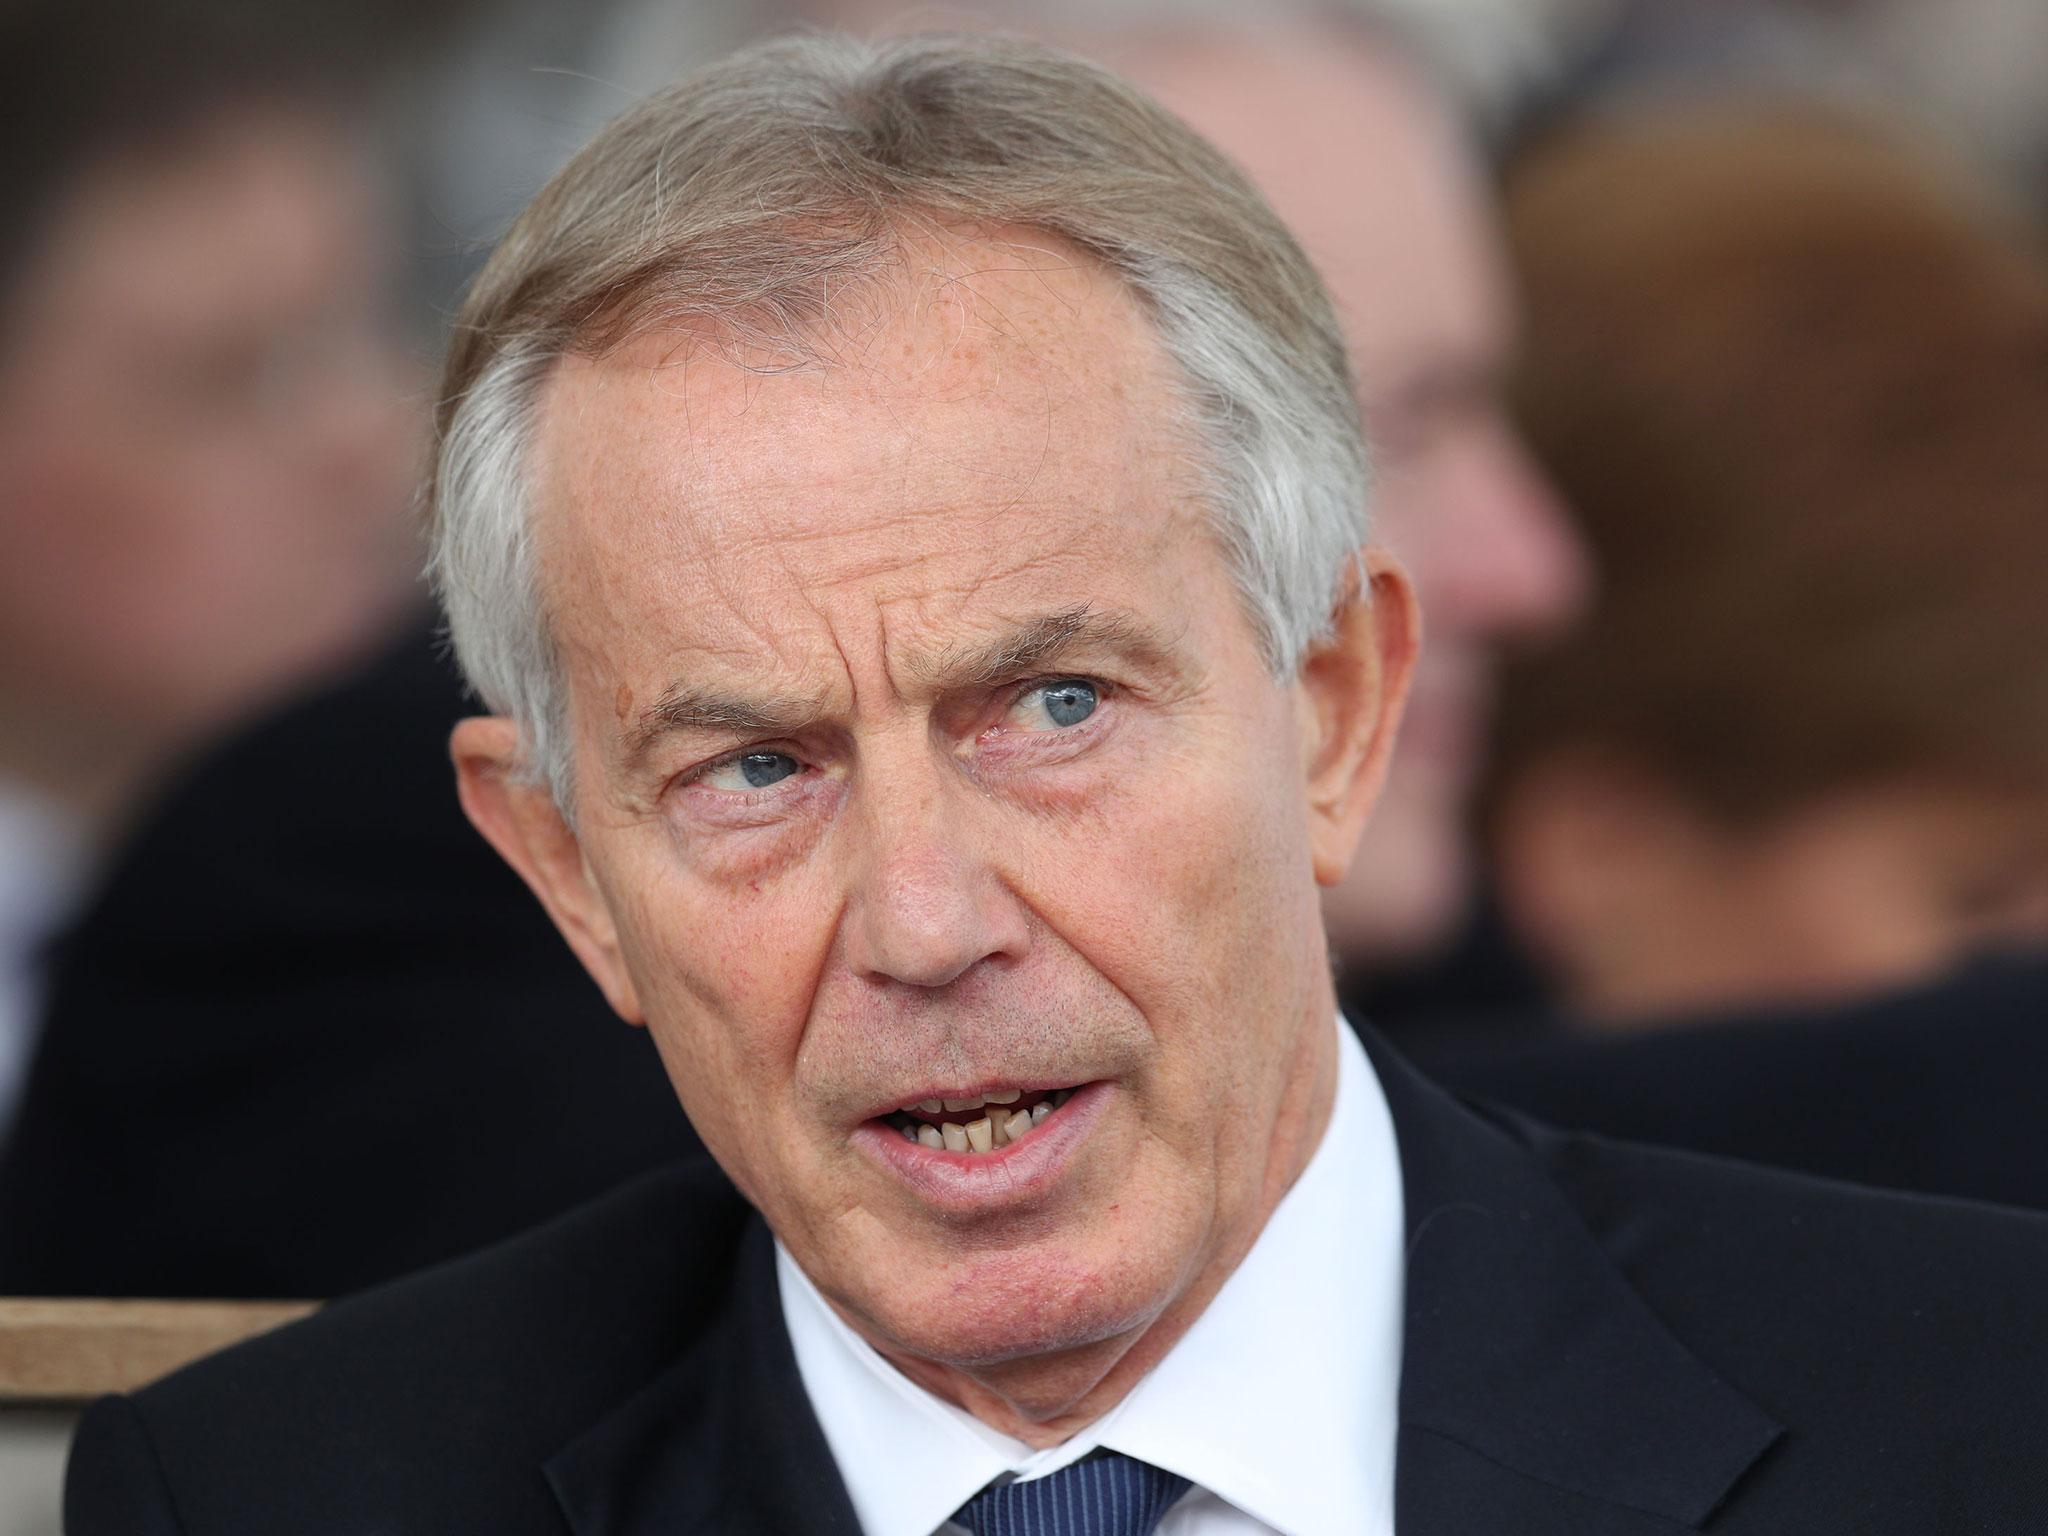 Mr Blair is a vocal critic of Jeremy Corbyn and believes voters should have change to change their mind on Brexit result